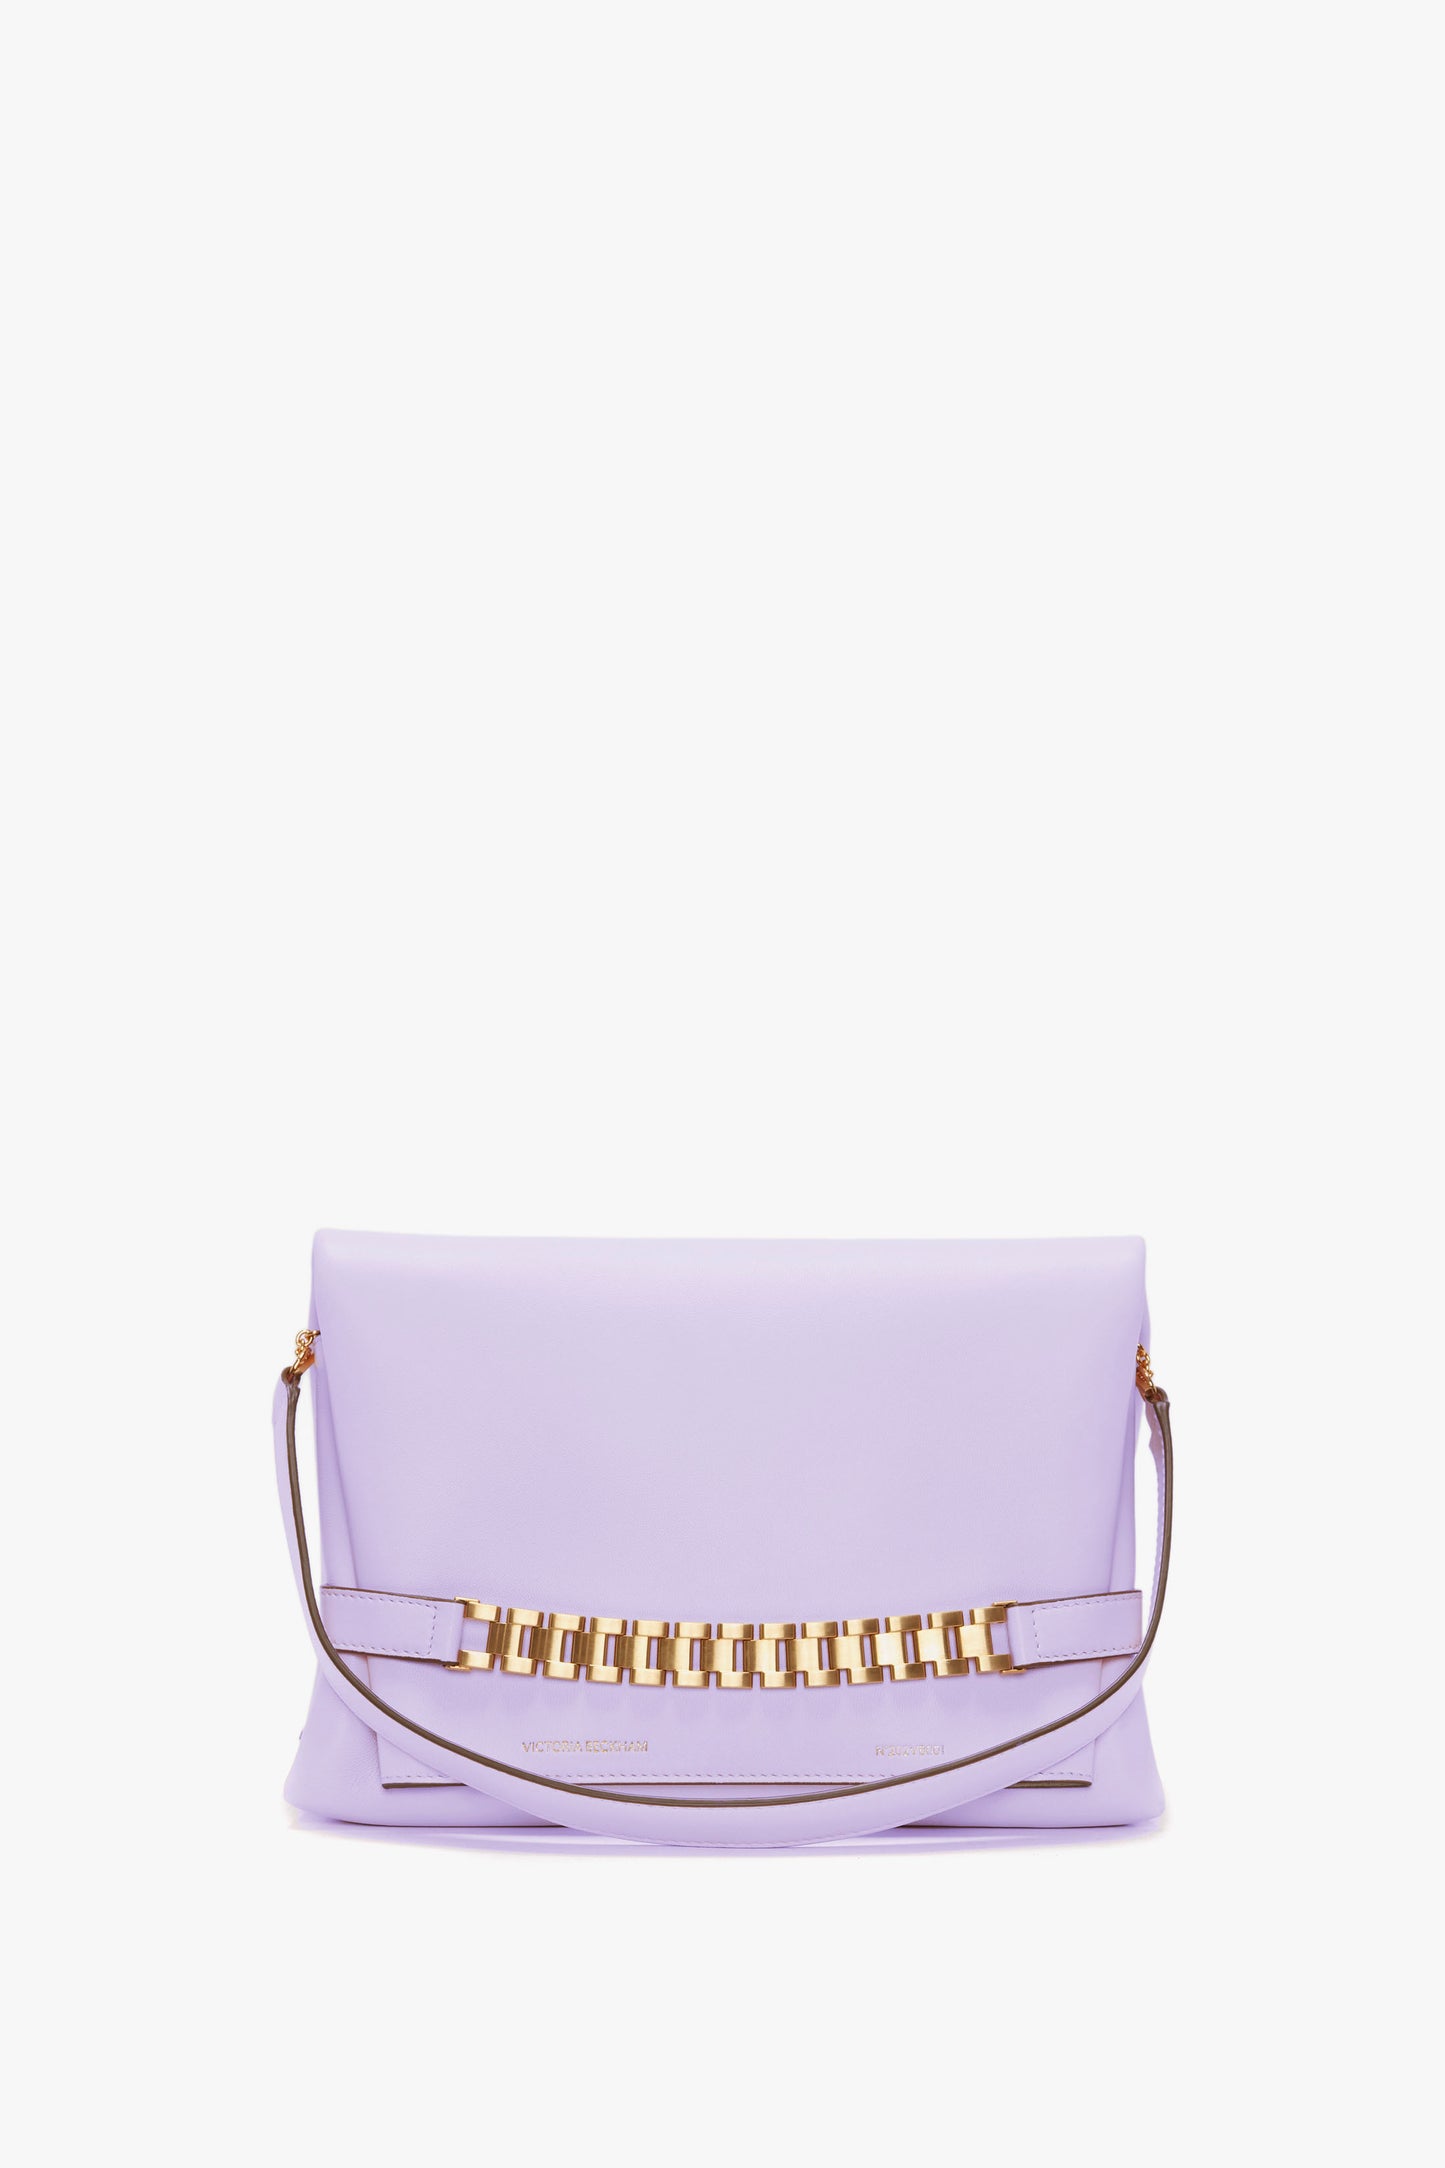 Chain Pouch with Strap in Lilac Leather – Victoria Beckham UK